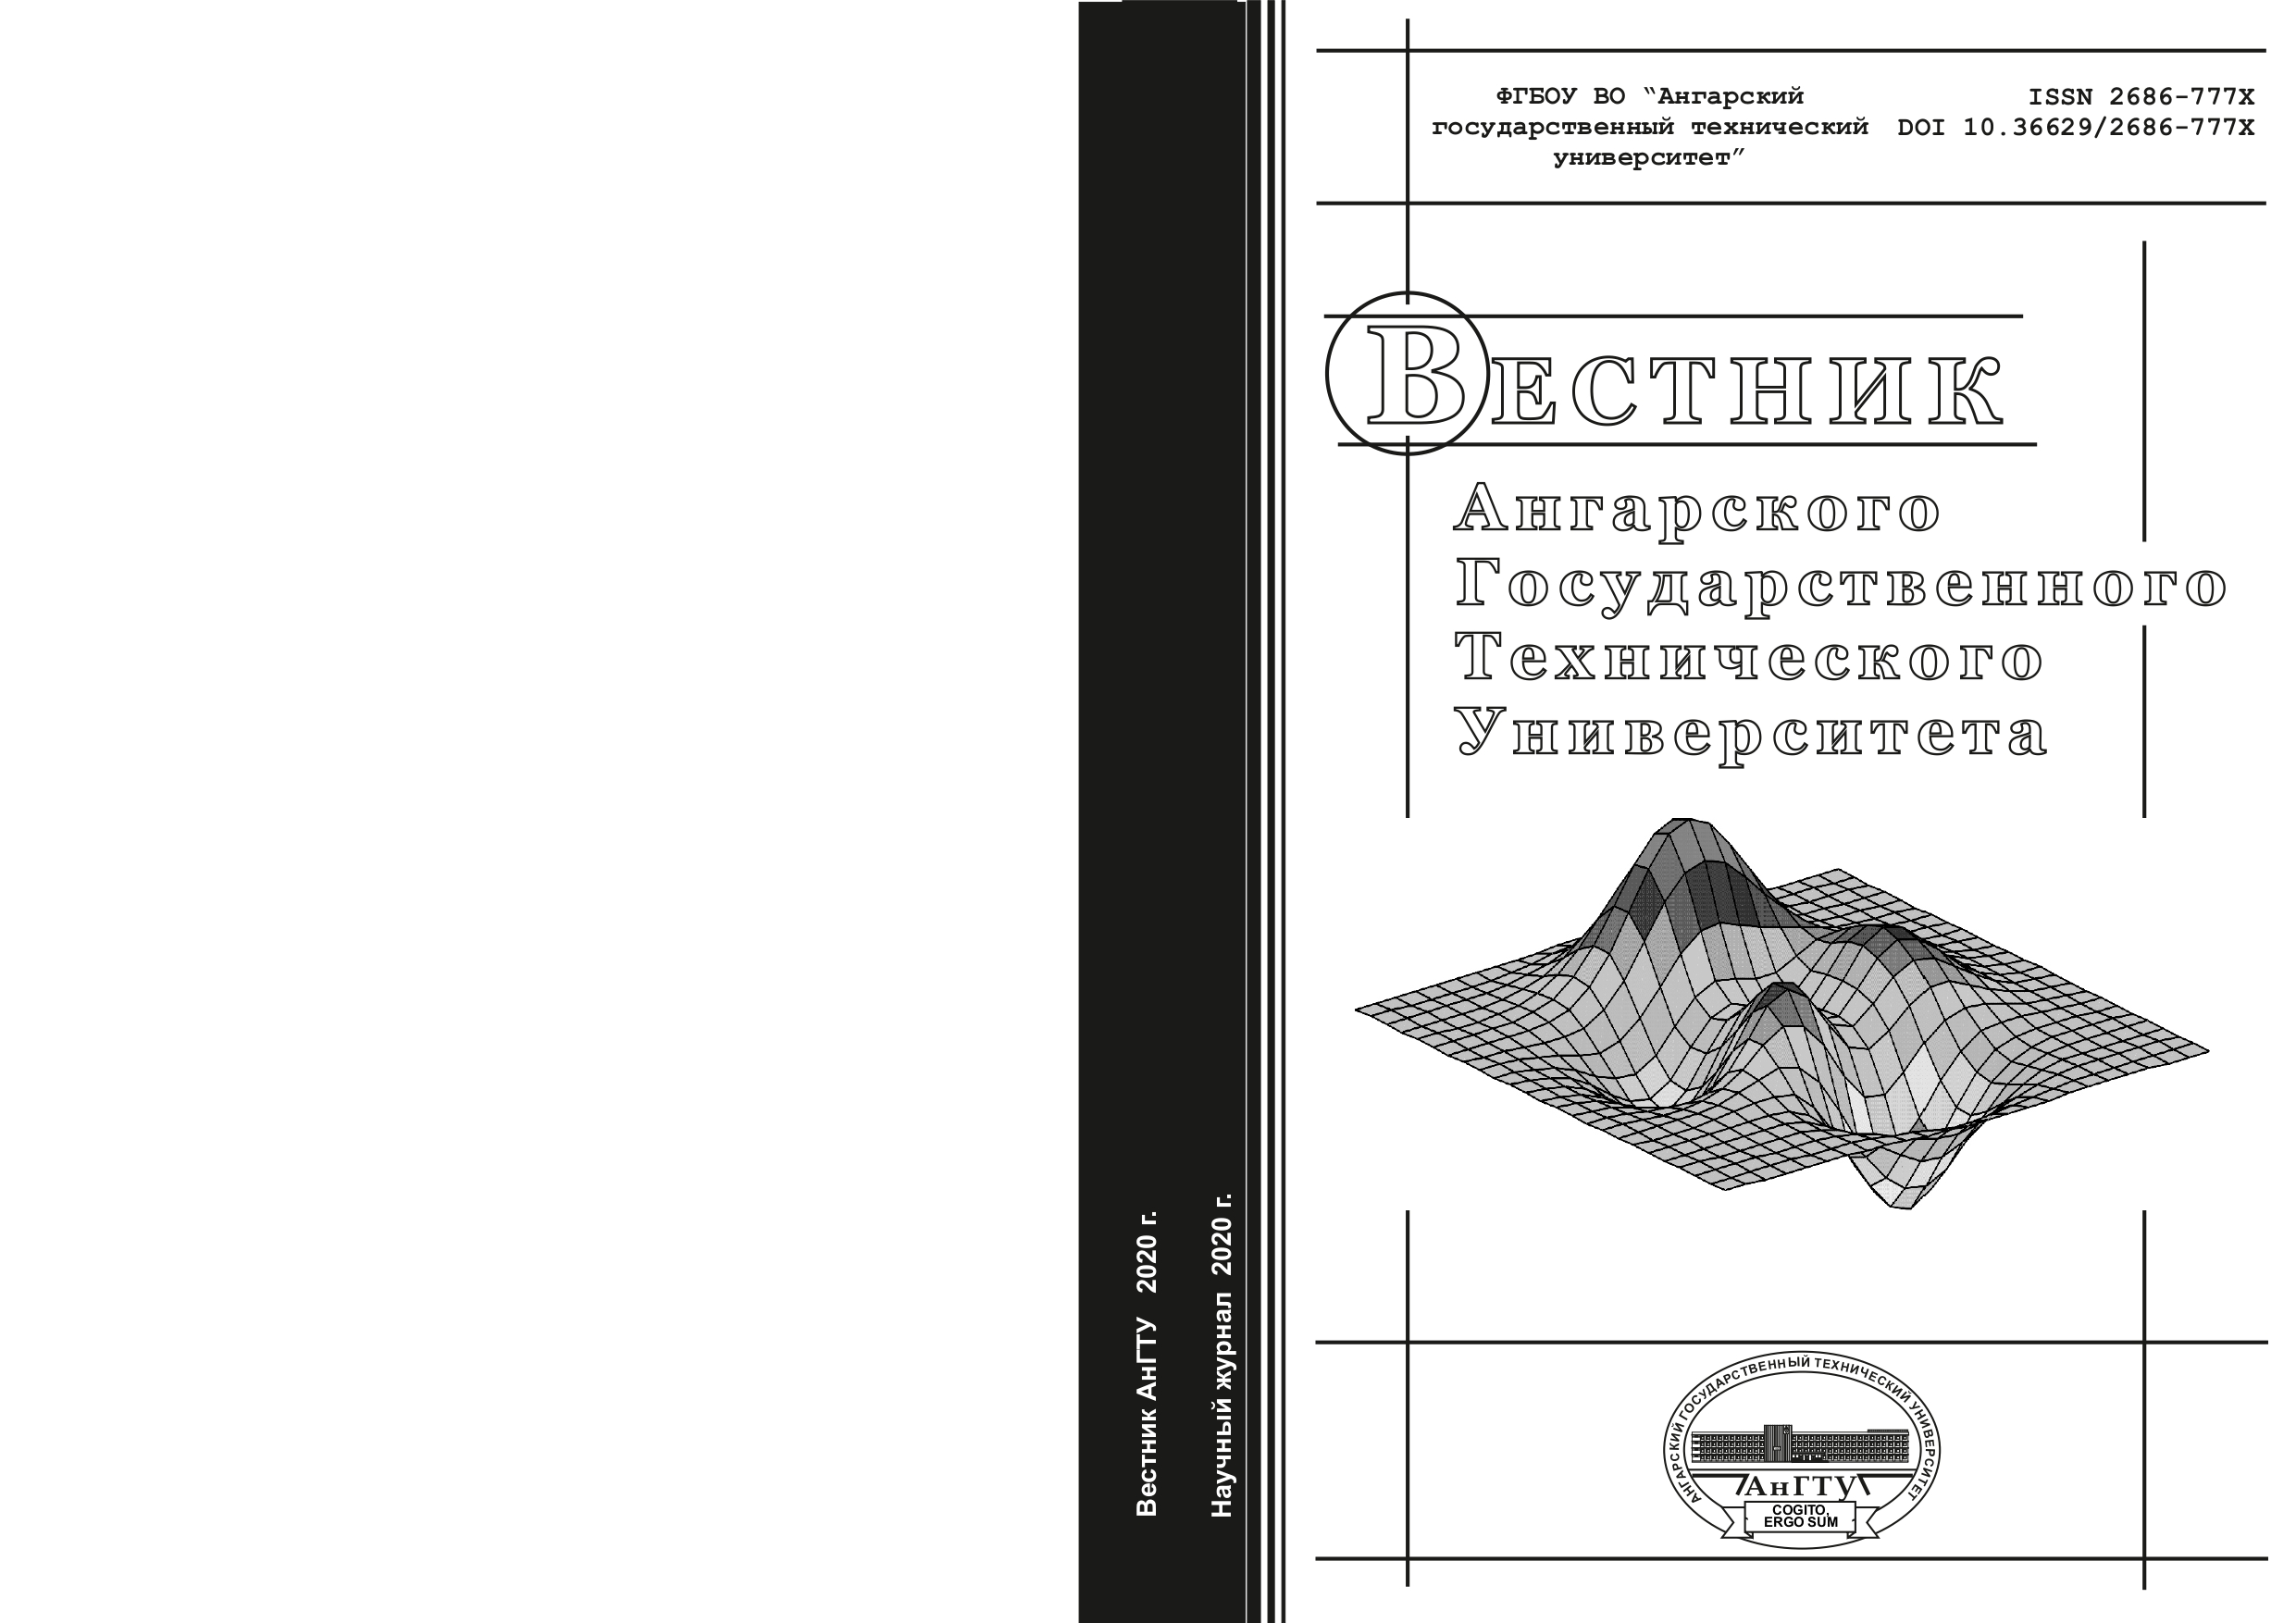                         Bulletin of the Angarsk State Technical University
            